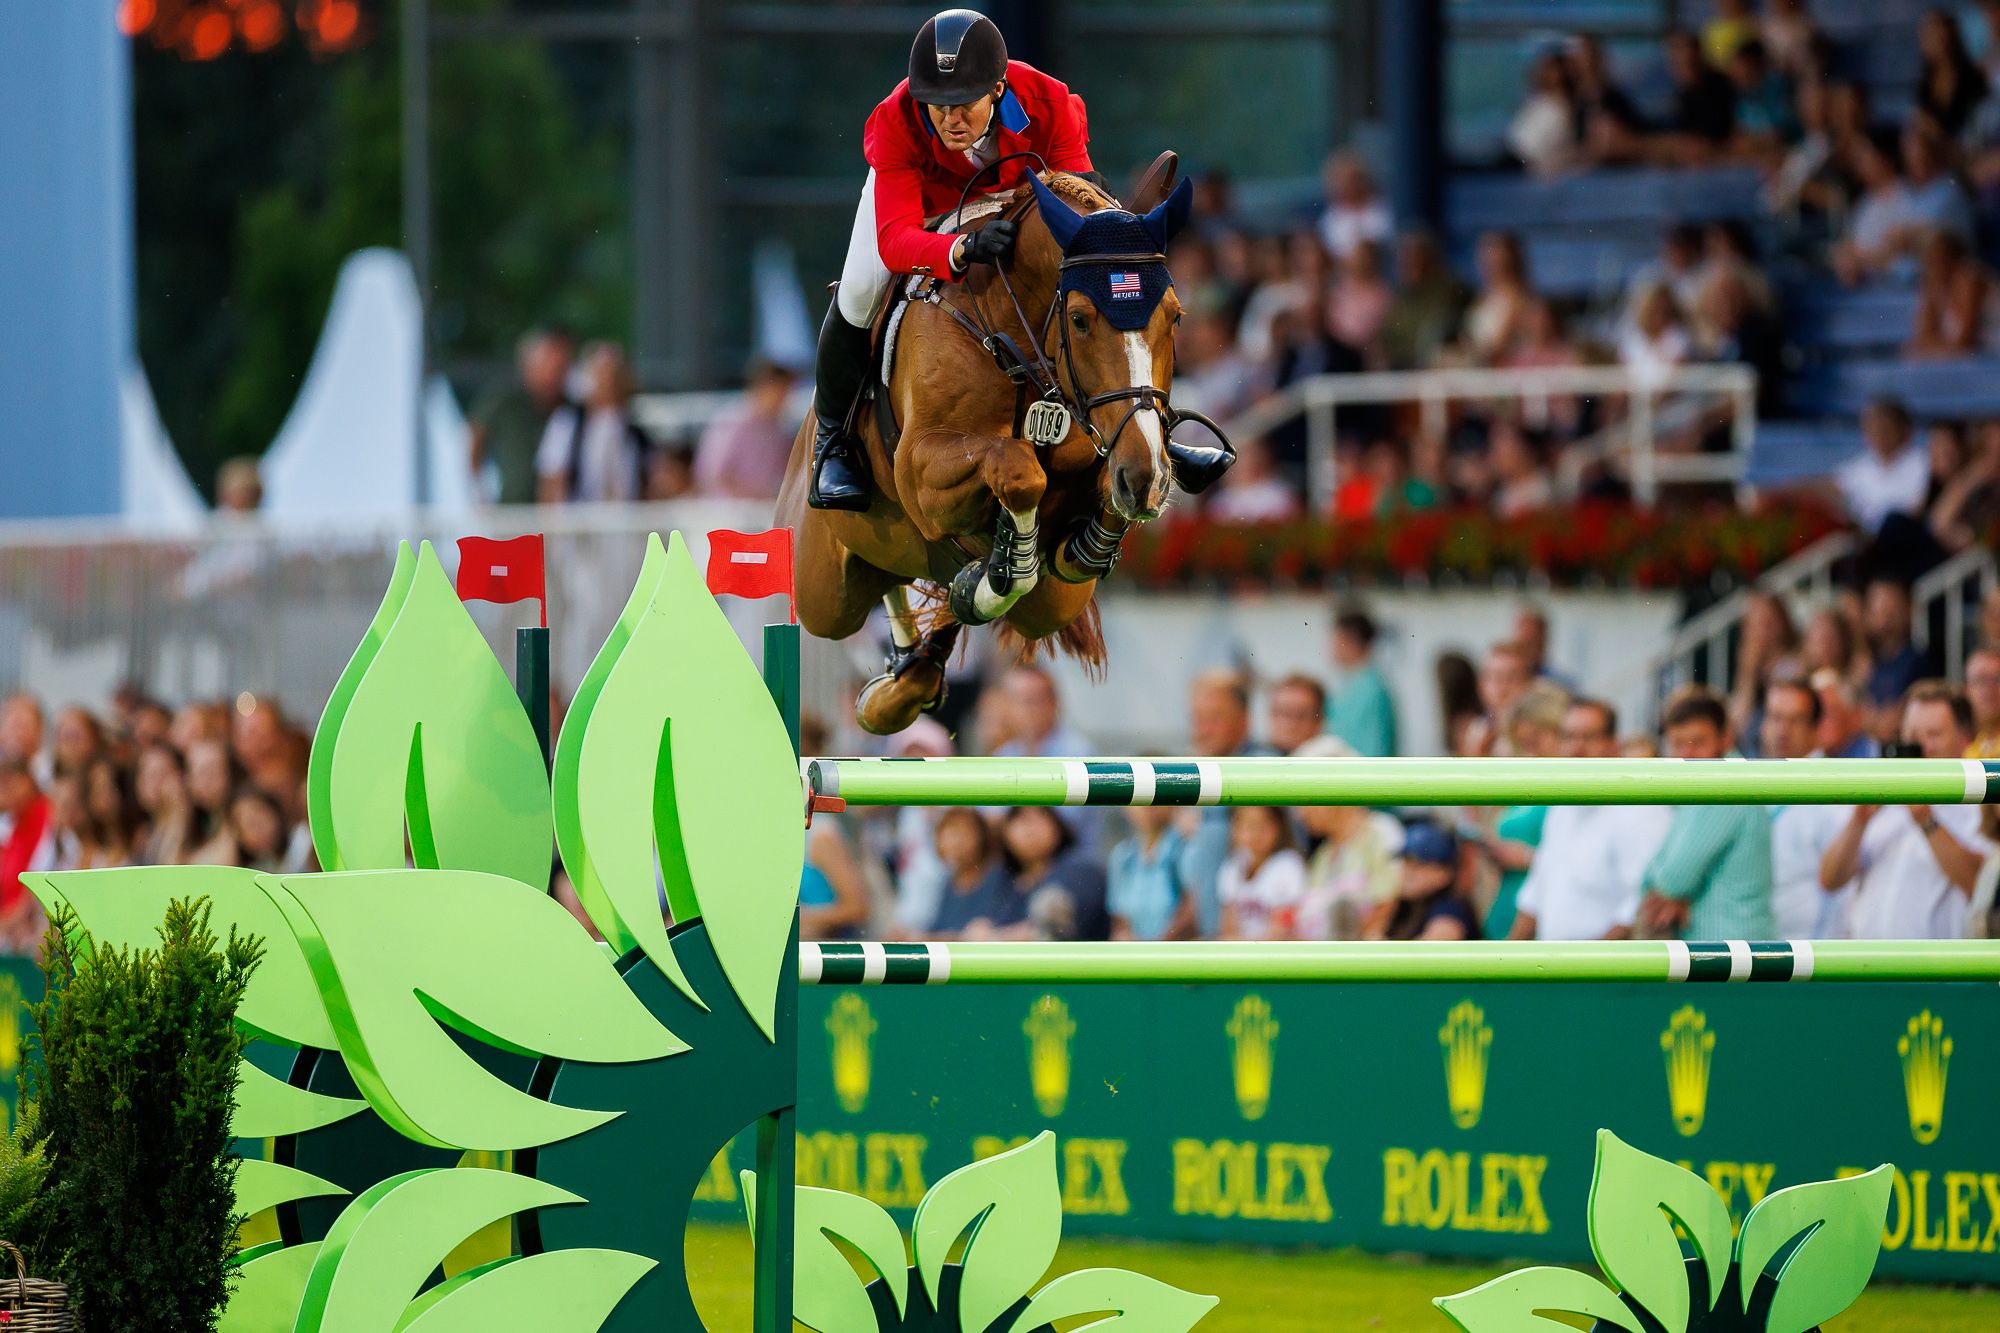 Great-Britain kicks-off Nations Cup Aachen